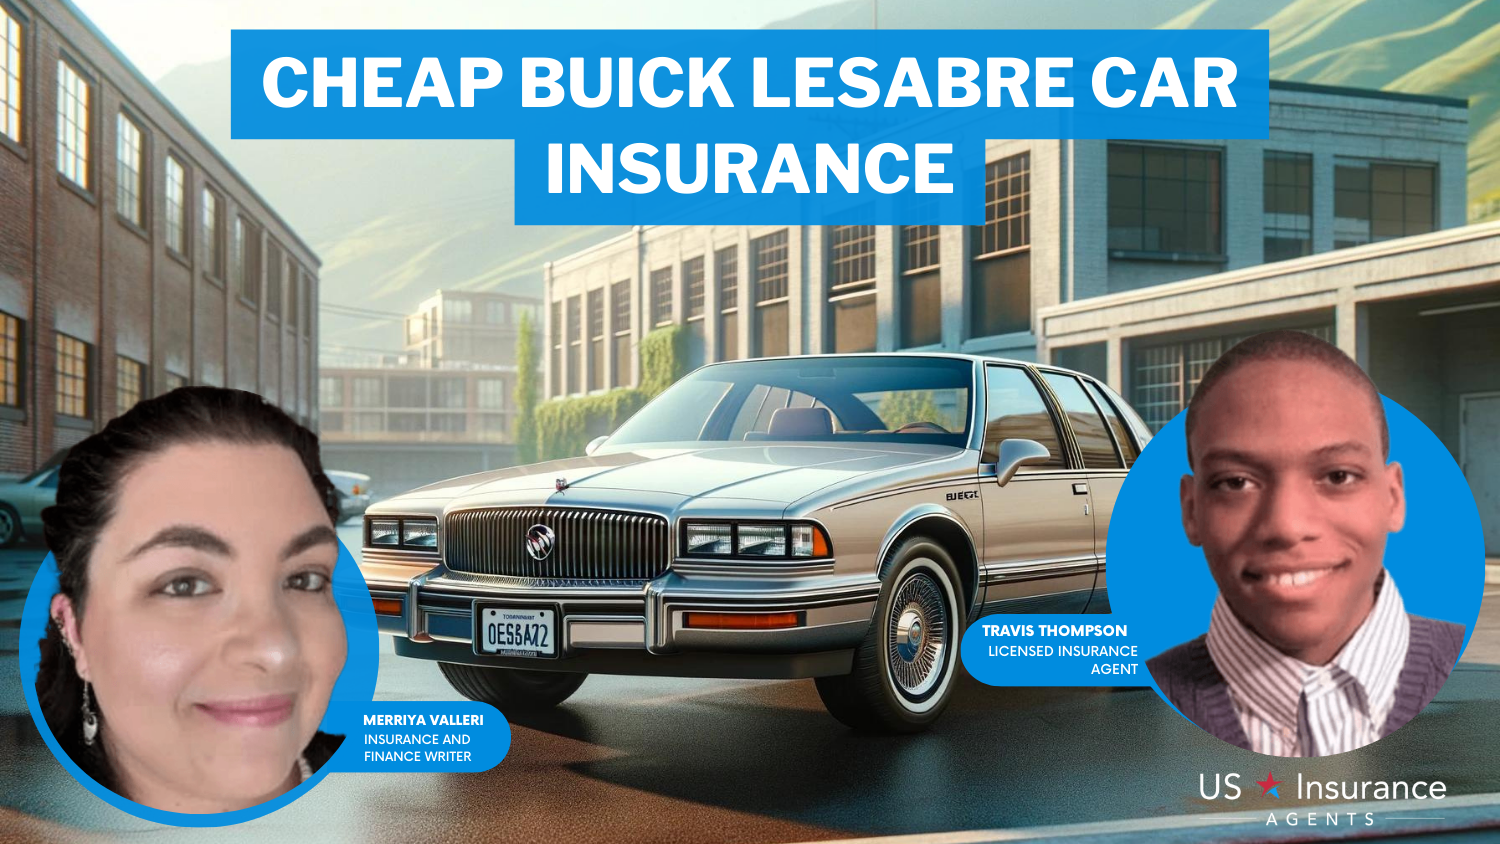 Cheap Buick LeSabre Car Insurance: Erie, USAA, and Nationwide.